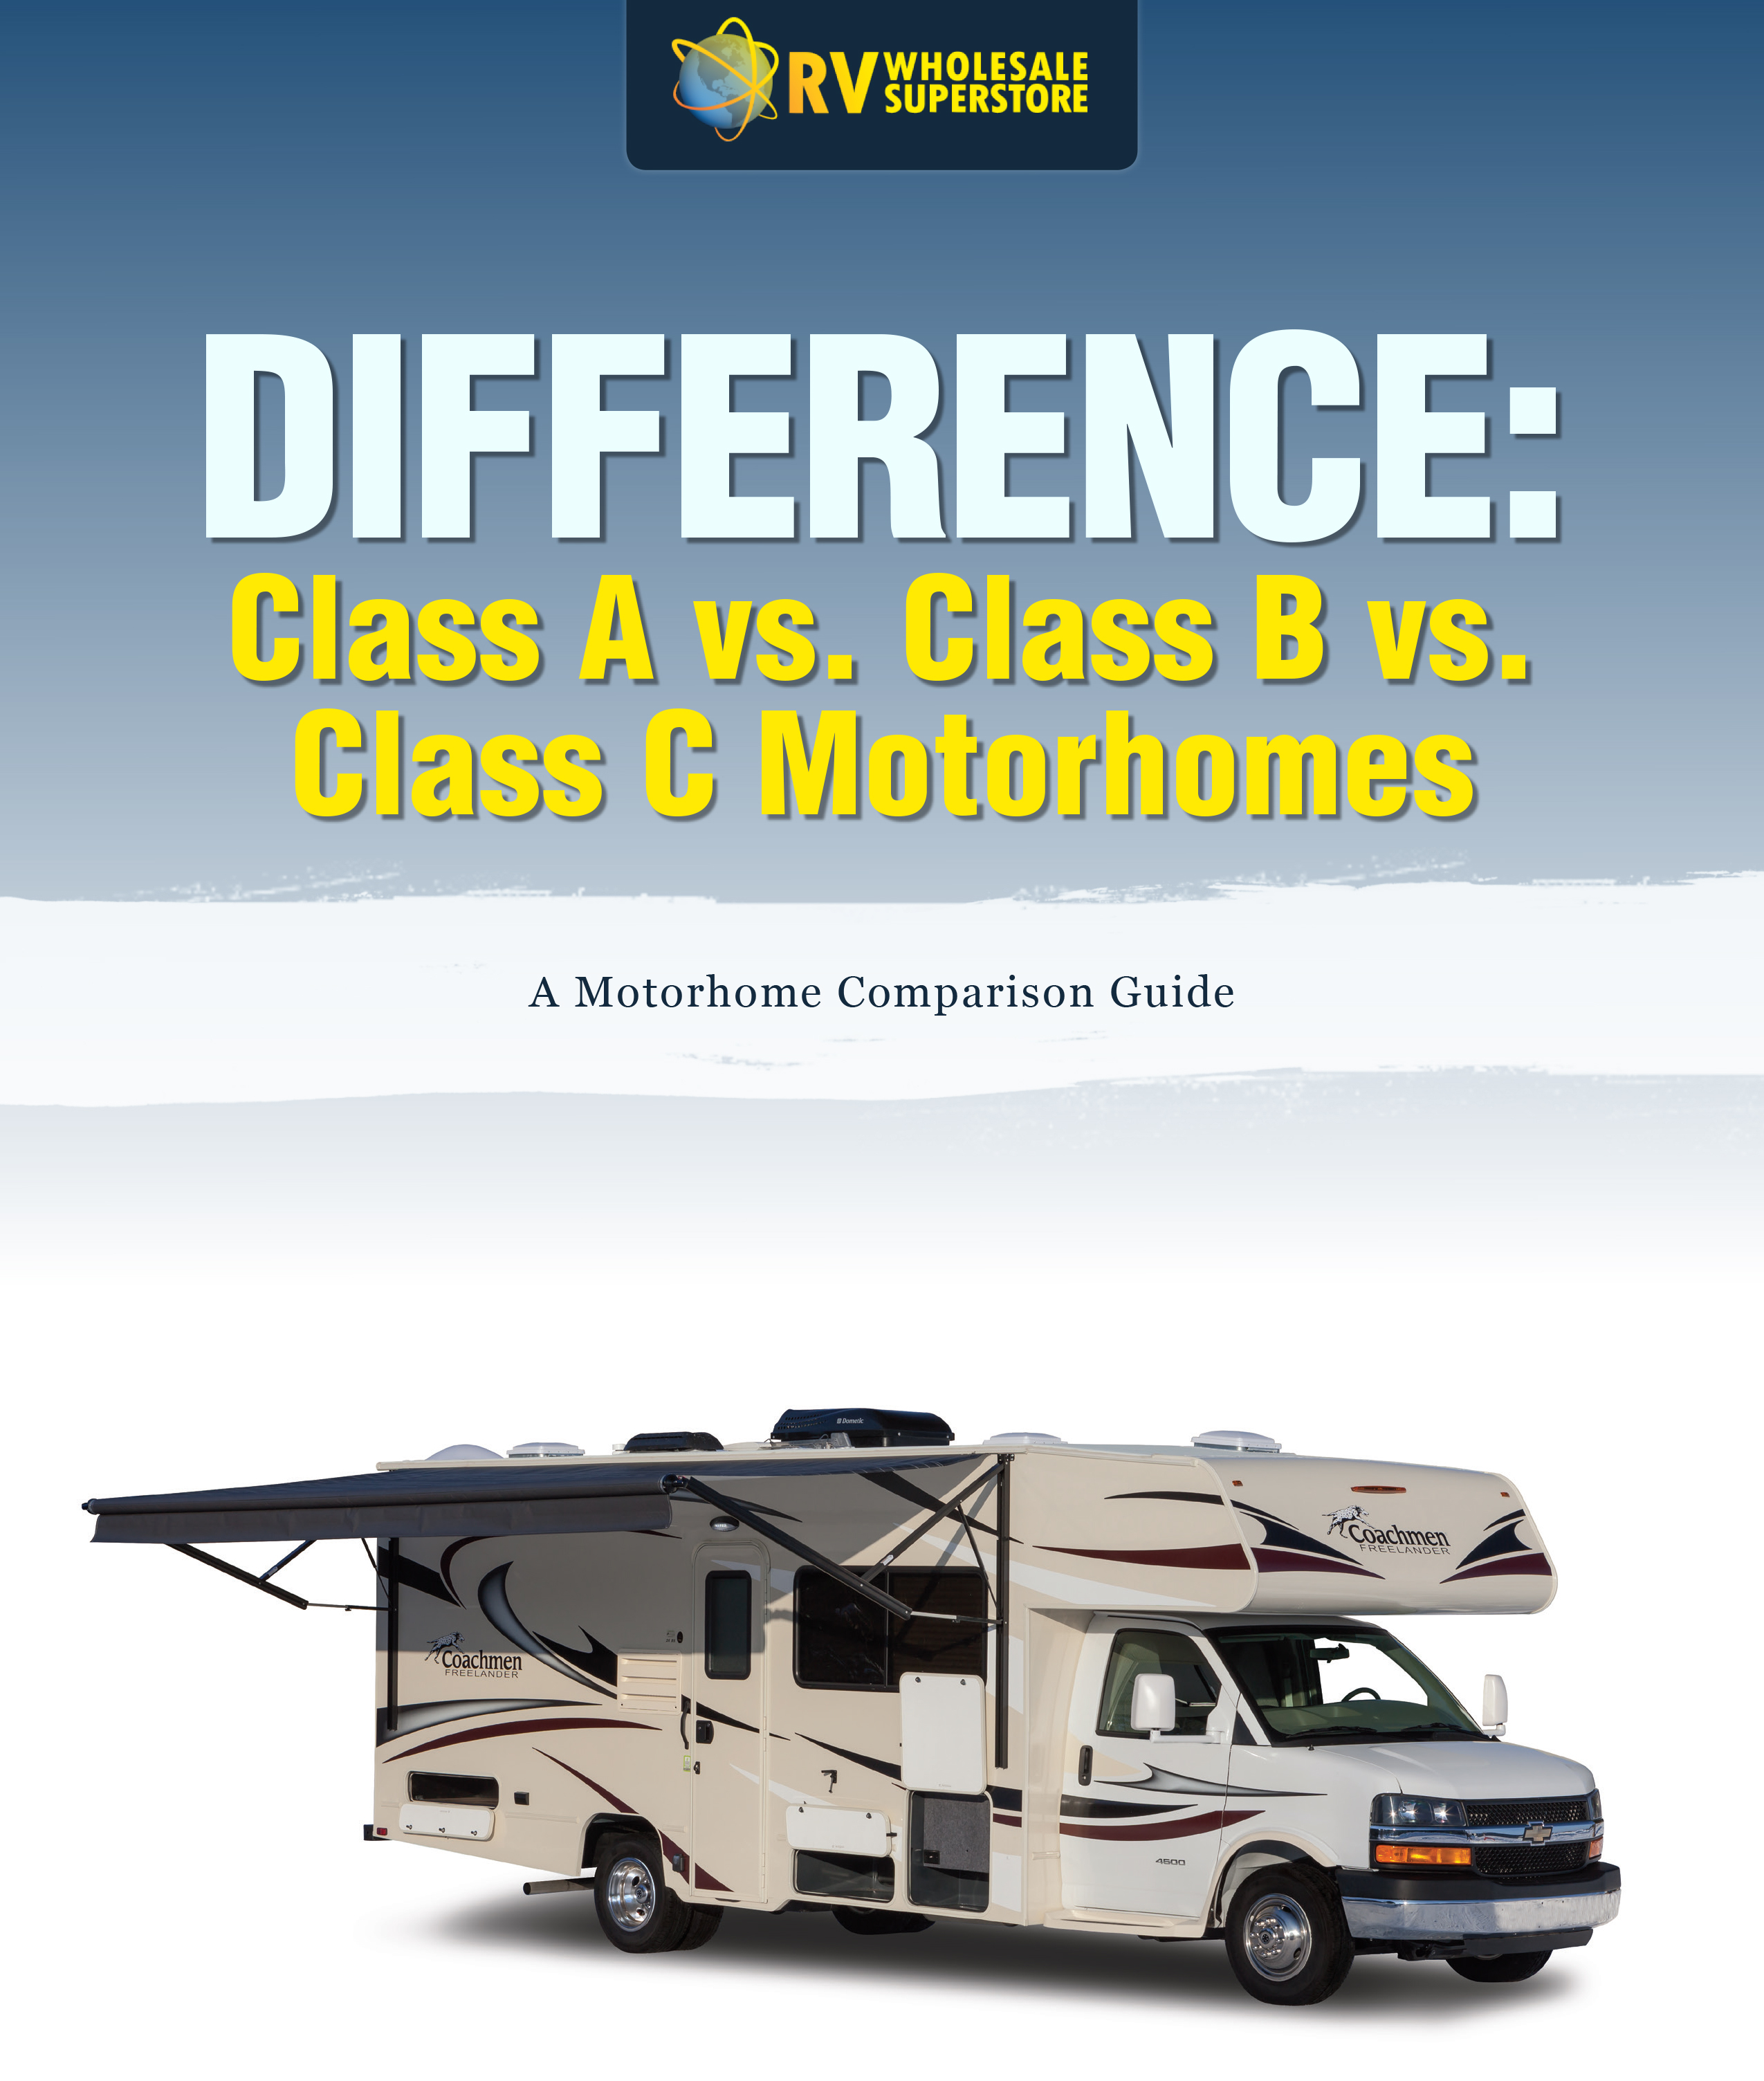 Get The Motorhome Class Guide ∣ RV Wholesale Superstore